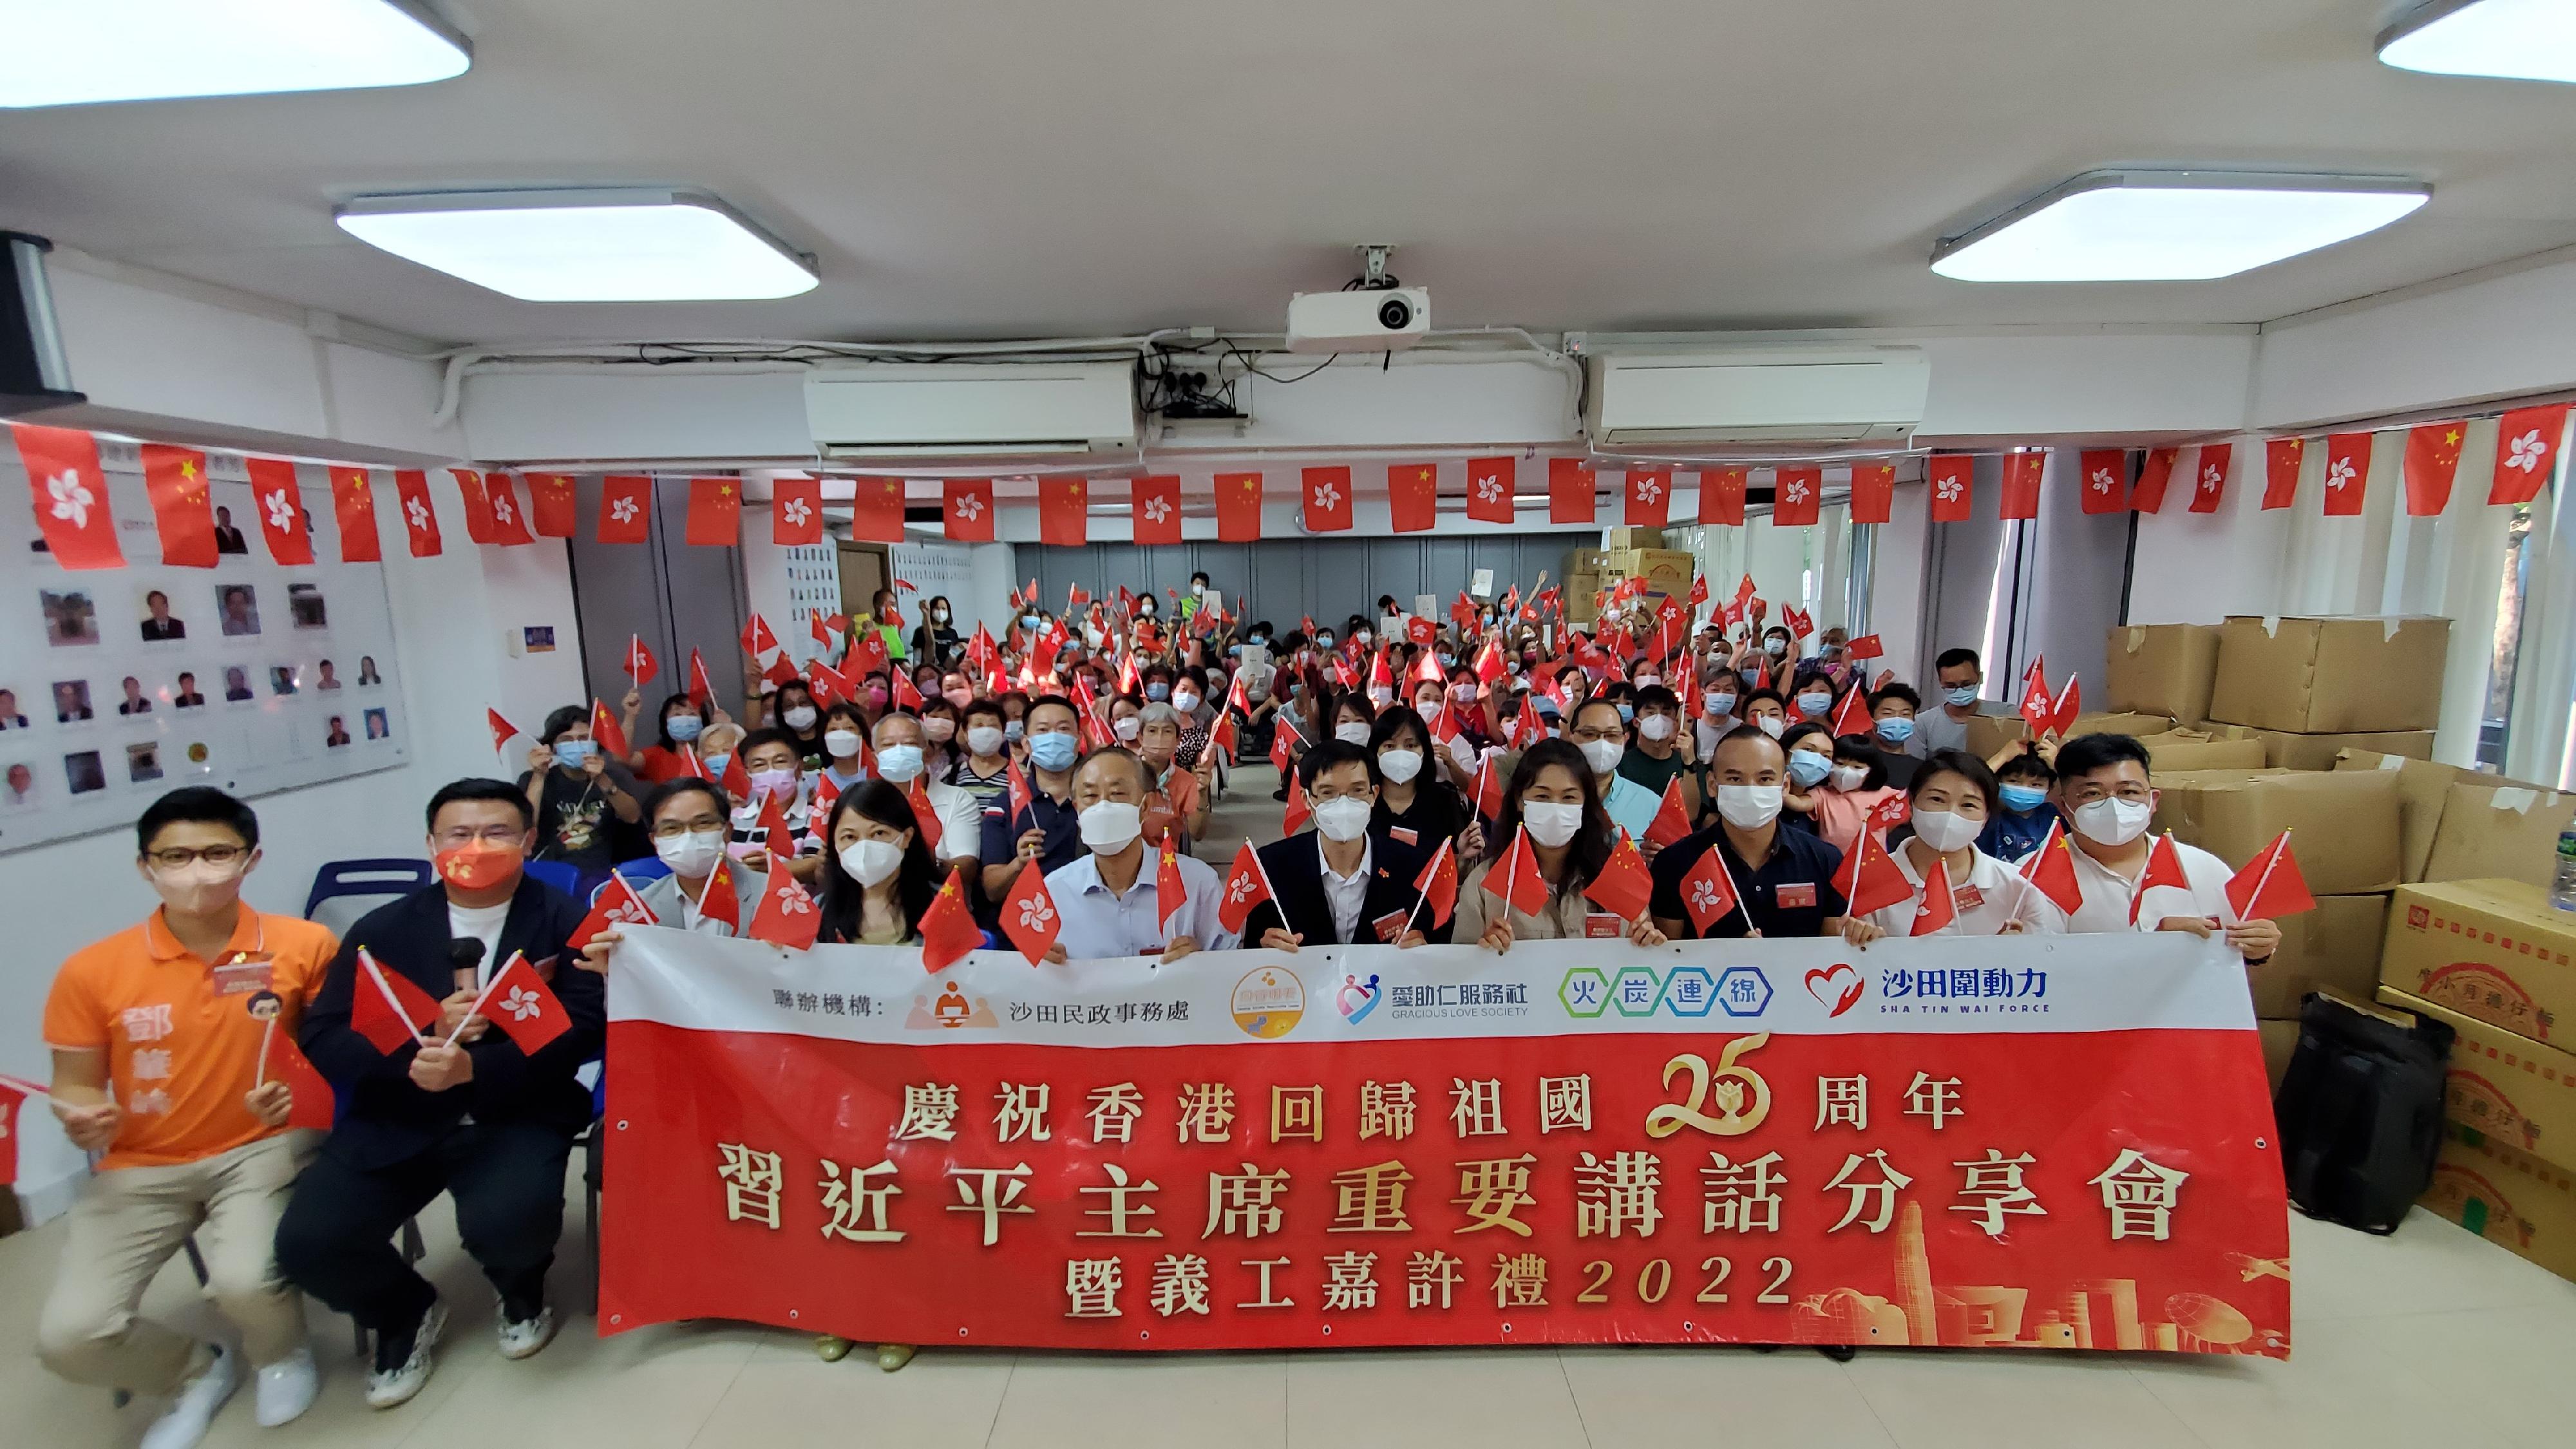 The Sha Tin District Office (STDO), in collaboration with the Fo Tan Team, the Gracious Love Society, the Project Tomorrow and the Sha Tin Wai Force, yesterday (July 31) jointly held the "Sharing Session of President Xi's Important Speech" at the office of the Sha Tin Rural Committee. Photo shows the Division Chief of the New Territories Sub-office of the Liaison Office of the Central People's Government in the Hong Kong Special Administrative Region, Mr Liao Minghua (front row, fifth right), Hong Kong Member of the Chinese People’s Political Consultative Conference Mr Kan Chung-nin (front row, fifth left) together with representatives from the STDO, together with other guests and volunteers from the co-organising local organisations at the session. 